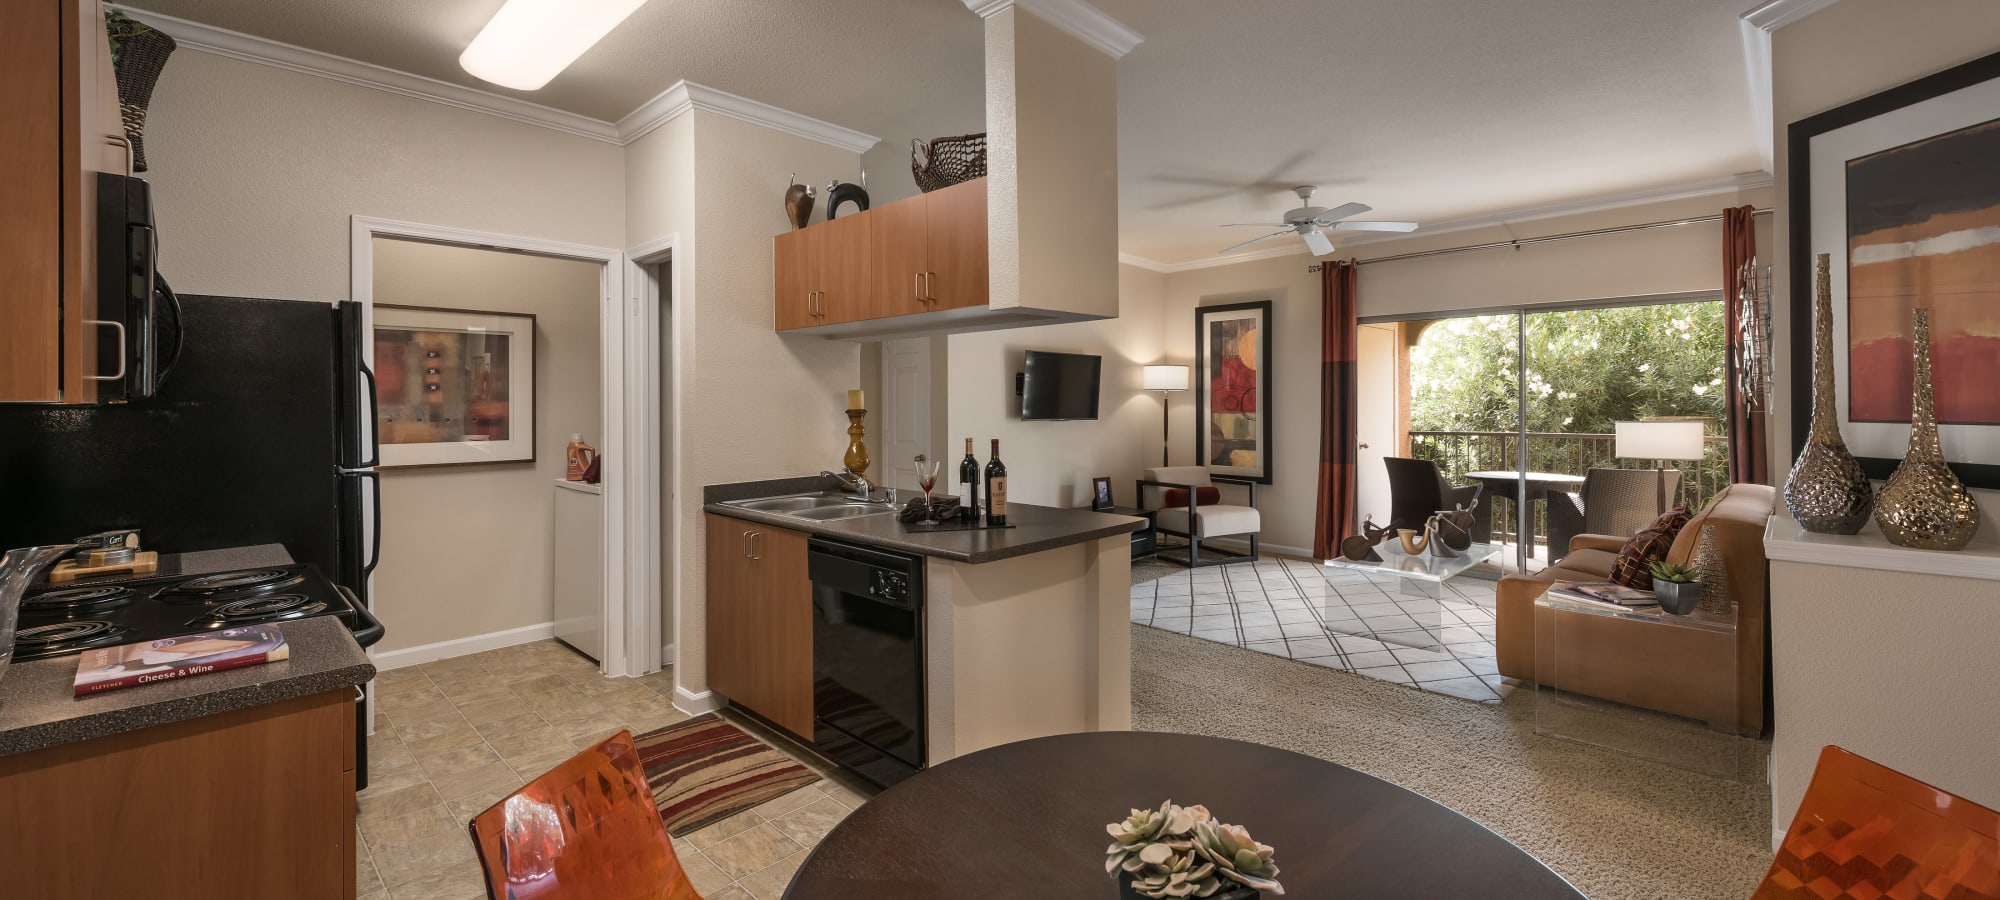  Kitchen and Living Room at Borrego at Spectrum in Gilbert, Arizona